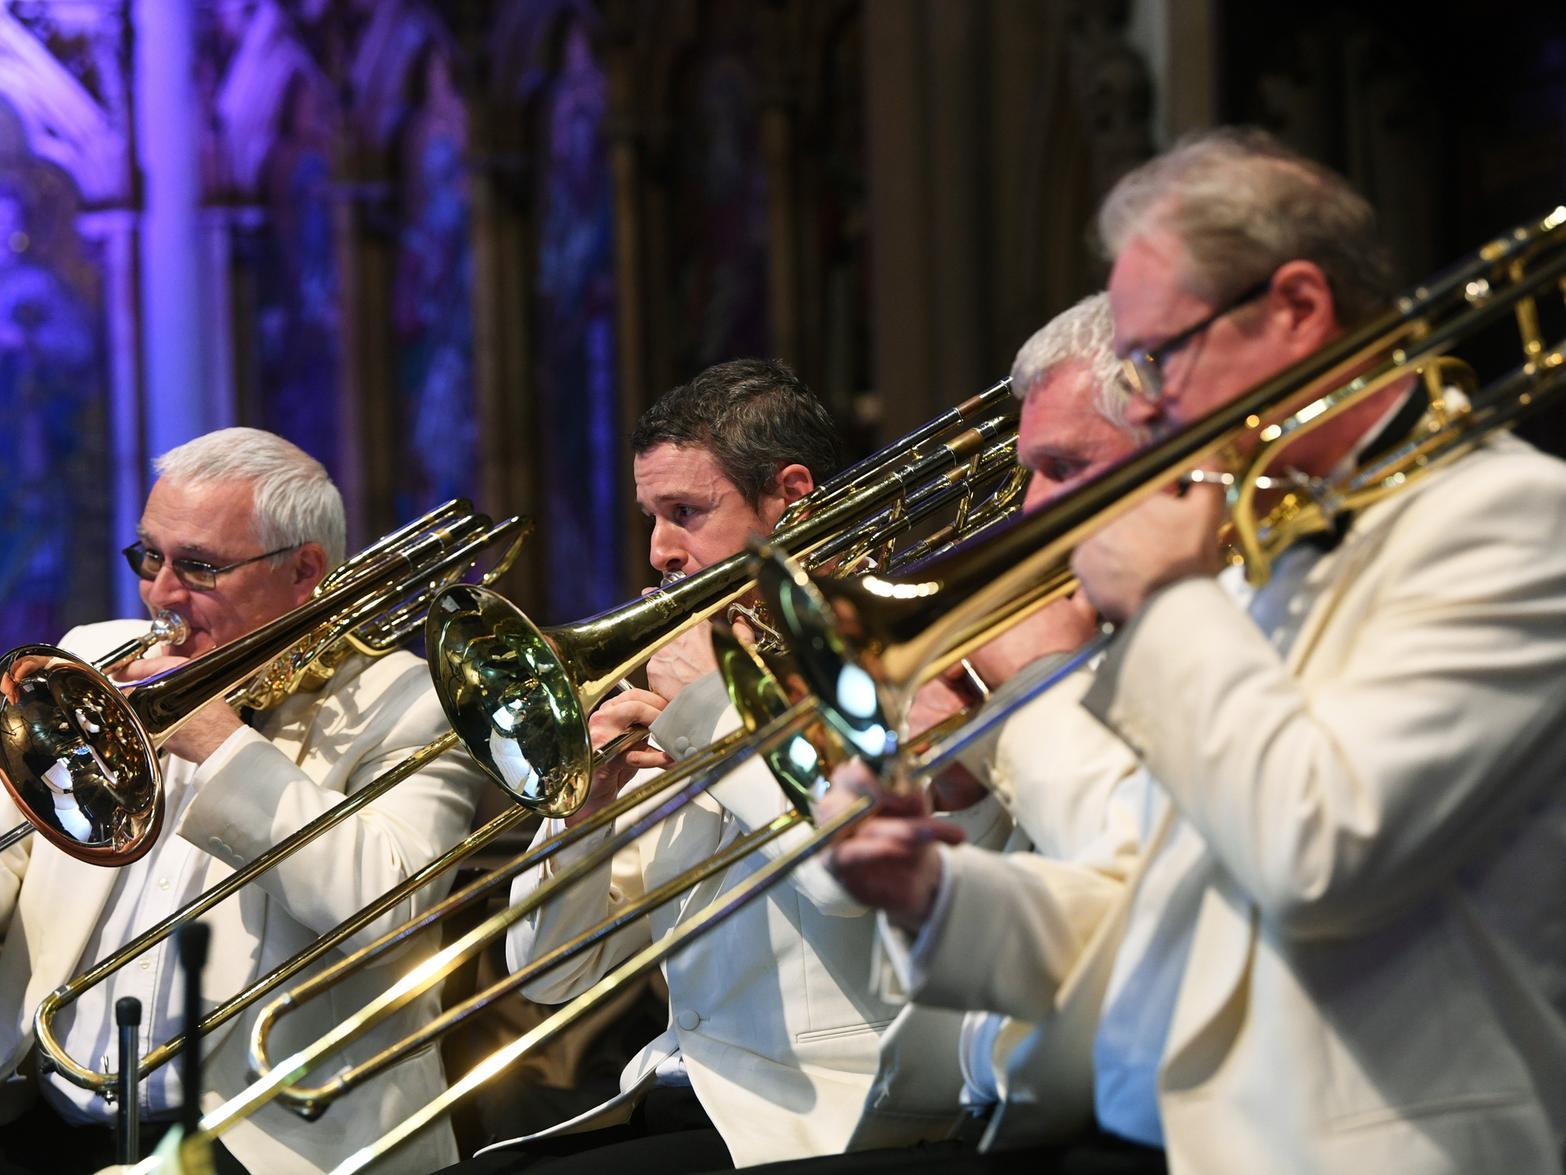 The Yorkshire Evening Post brass band led the congregation in singing carols